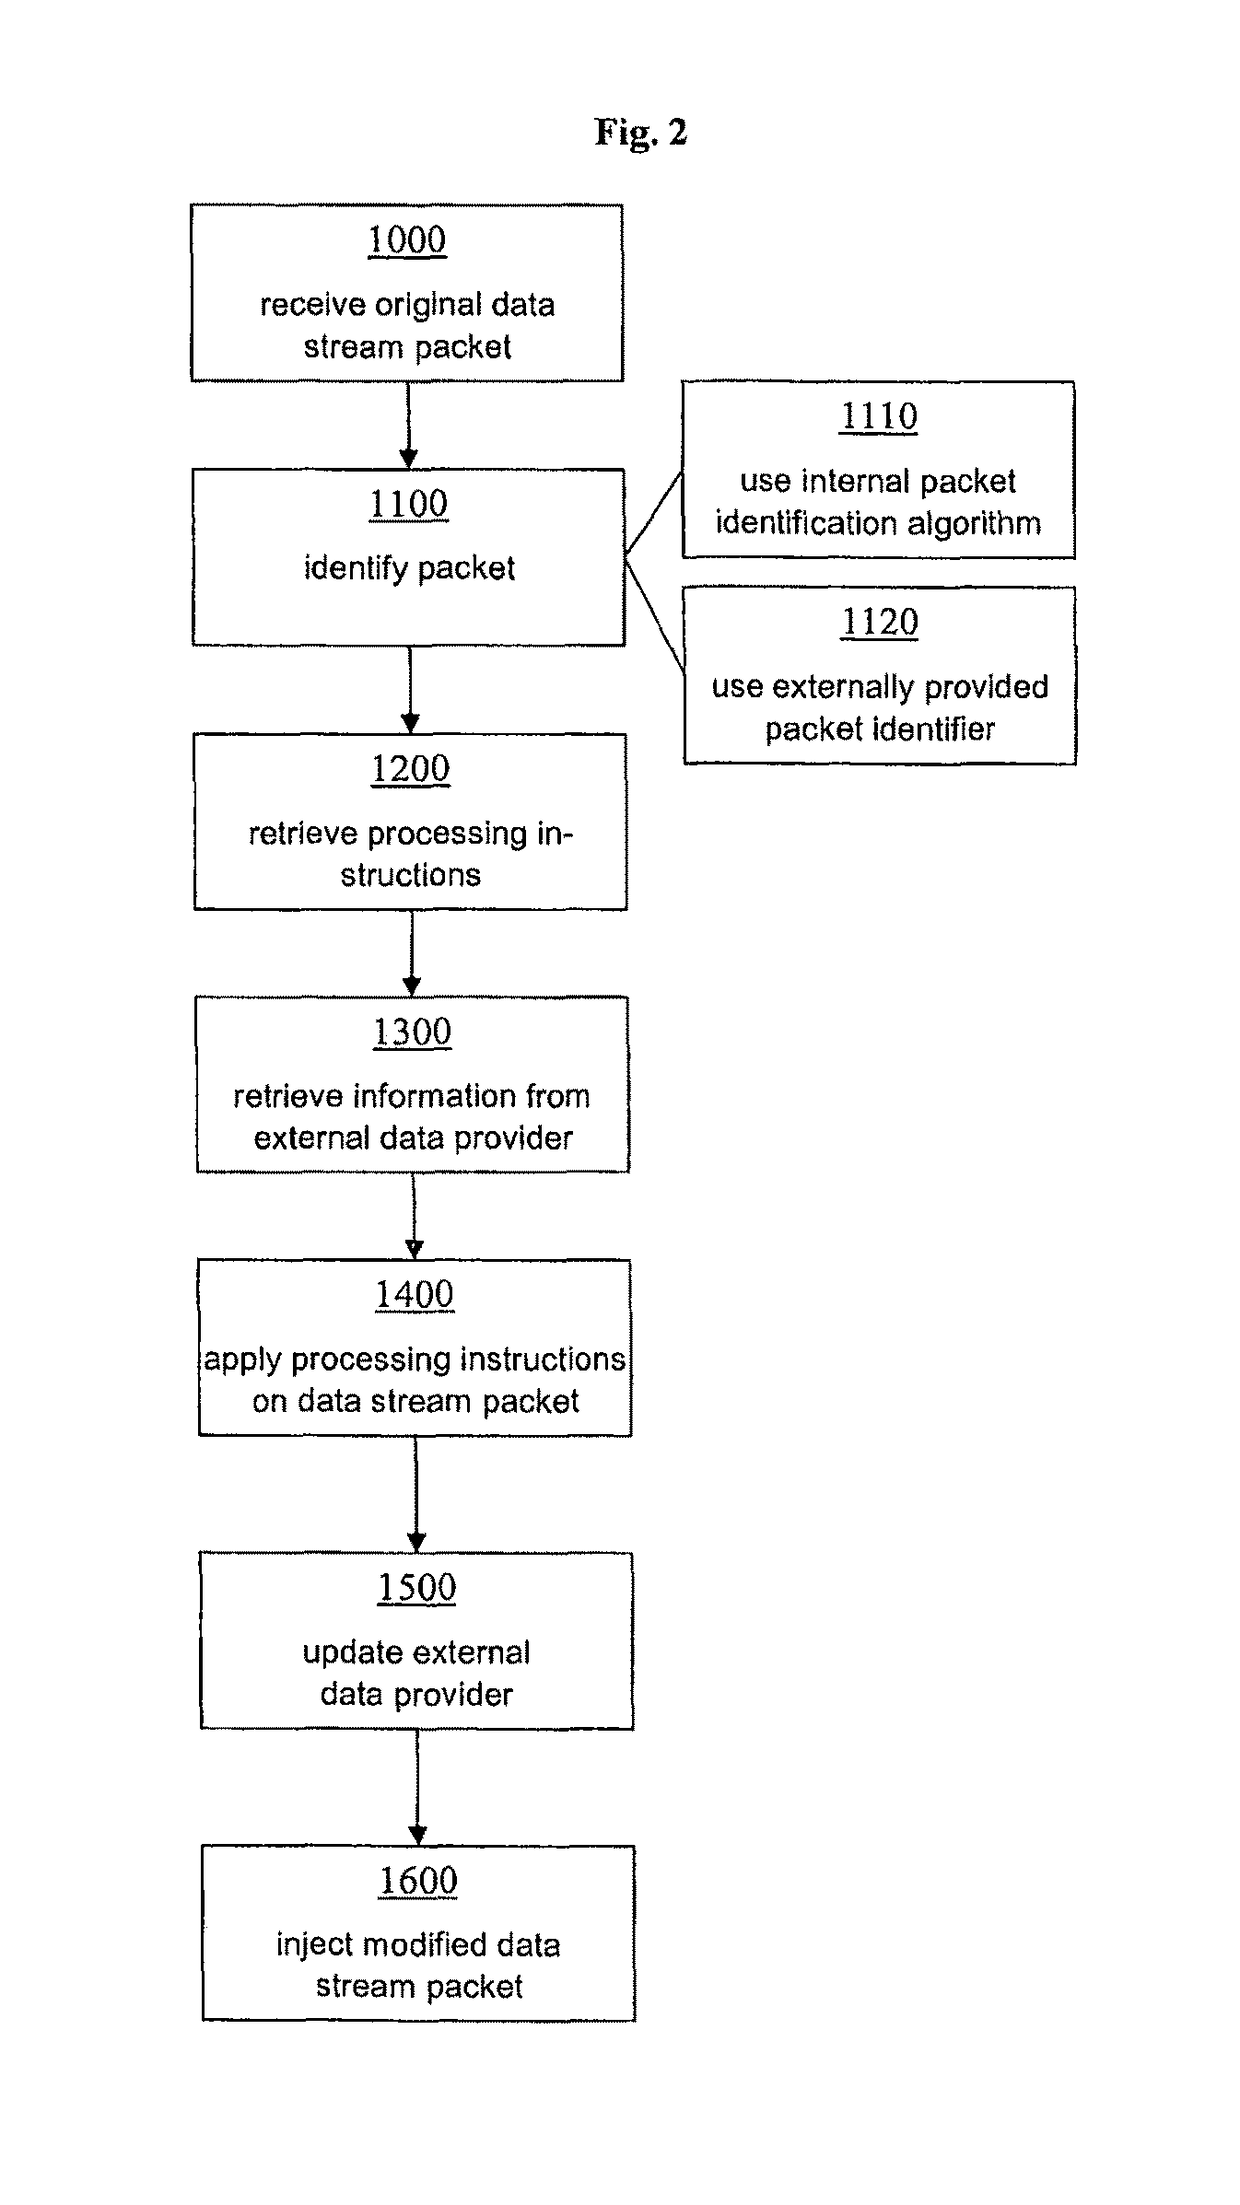 Mainframe injection component and method for manipulating data packets communicated between emulators and mainframes